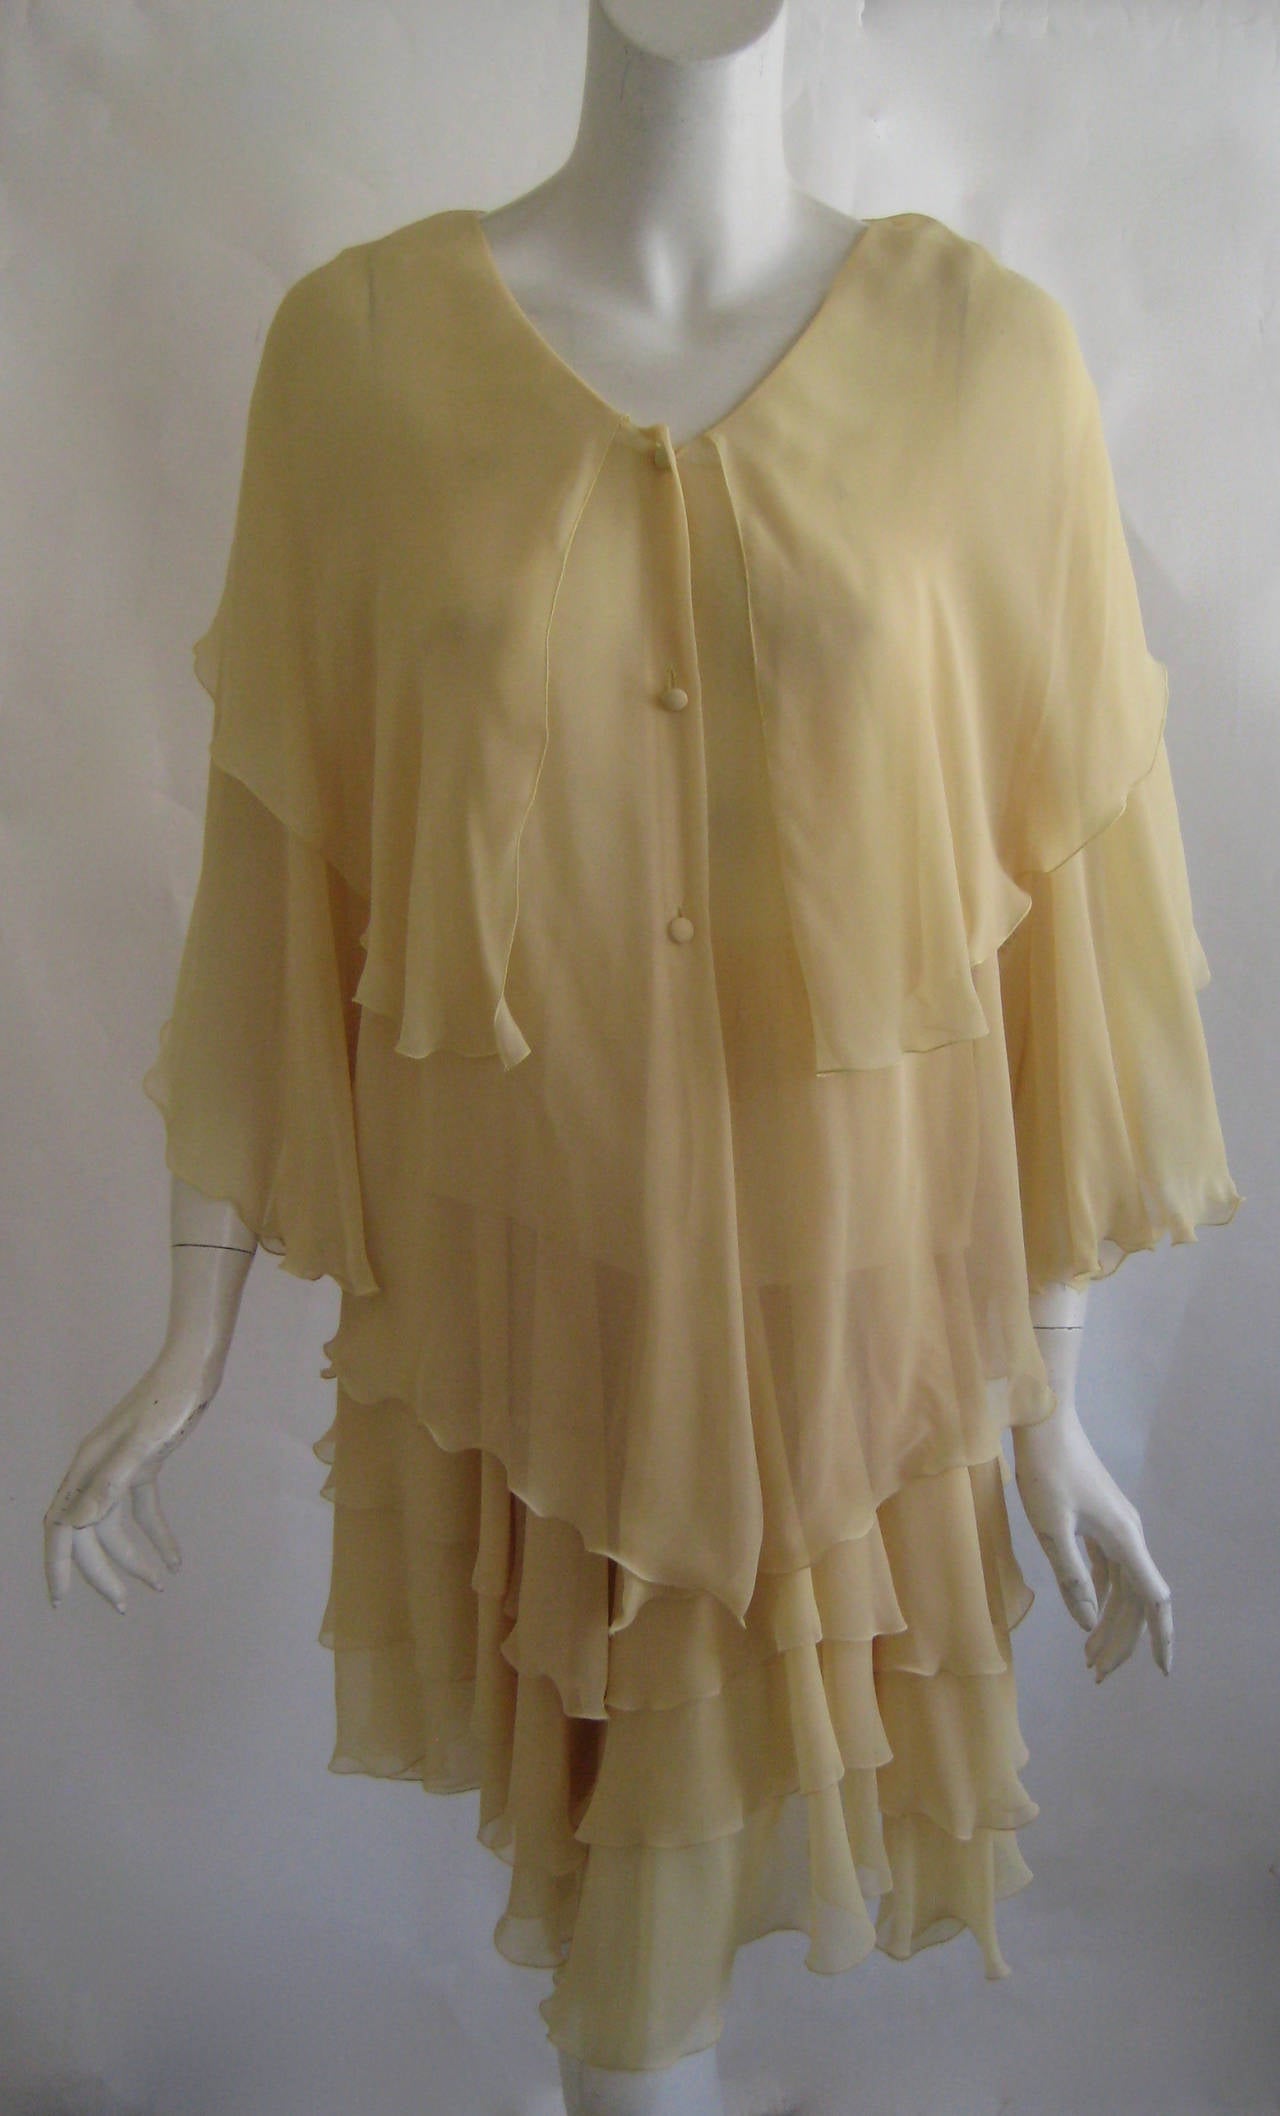 3 piece Azzaro ensemble made form 100% silk chiffon .
This consists of a sheer sleeveless tank and an overblouse that buttons down the front with silk covered buttons .The blouse has an attached silk caplet and the skirt is 3 layers of silk